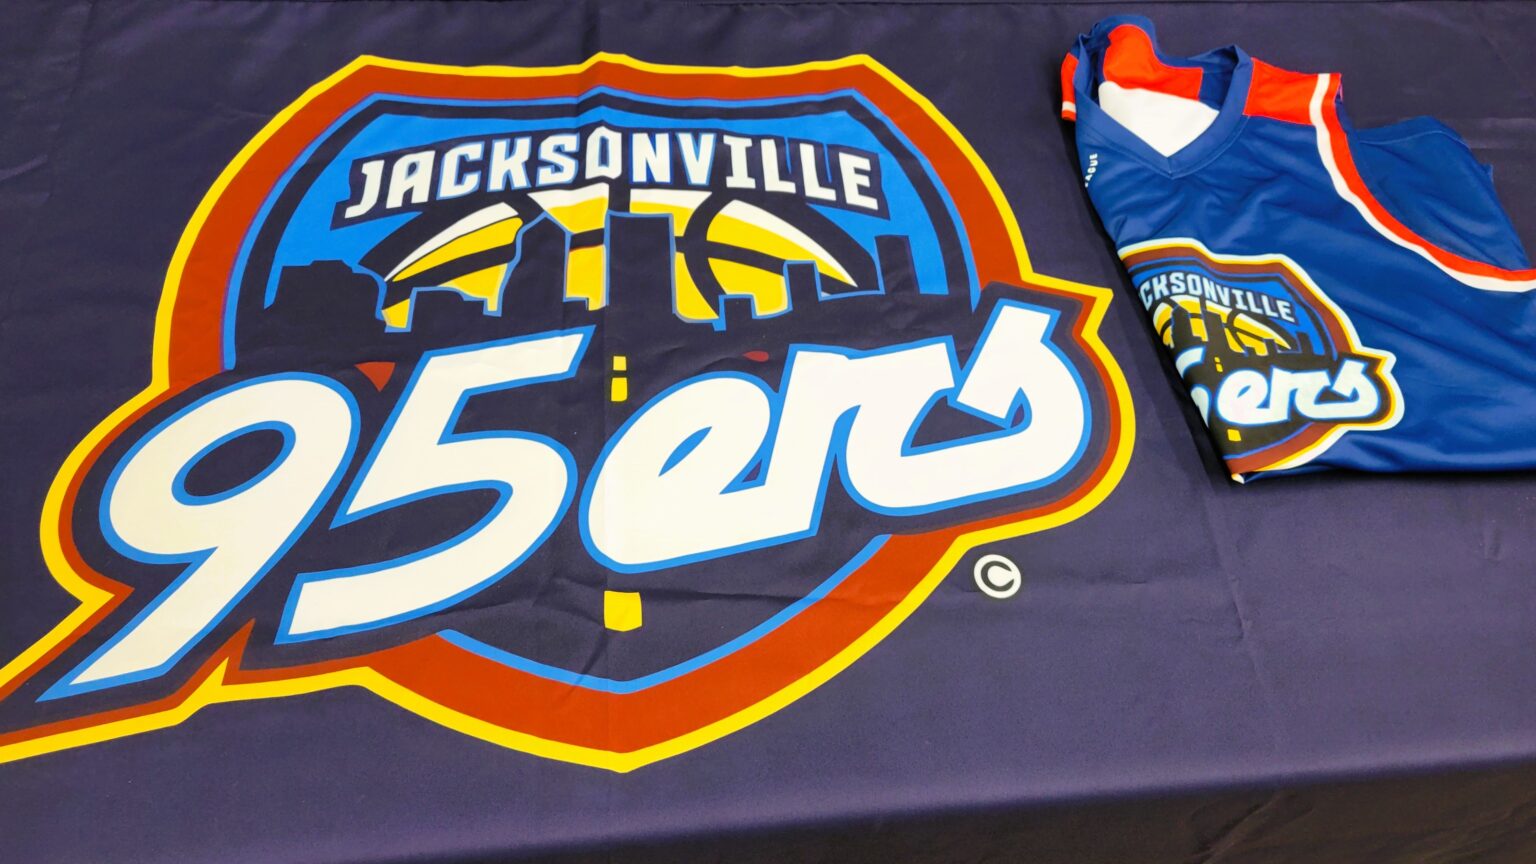 The Jacksonville 95ers will play at Jacksonville University's Swisher Gym.